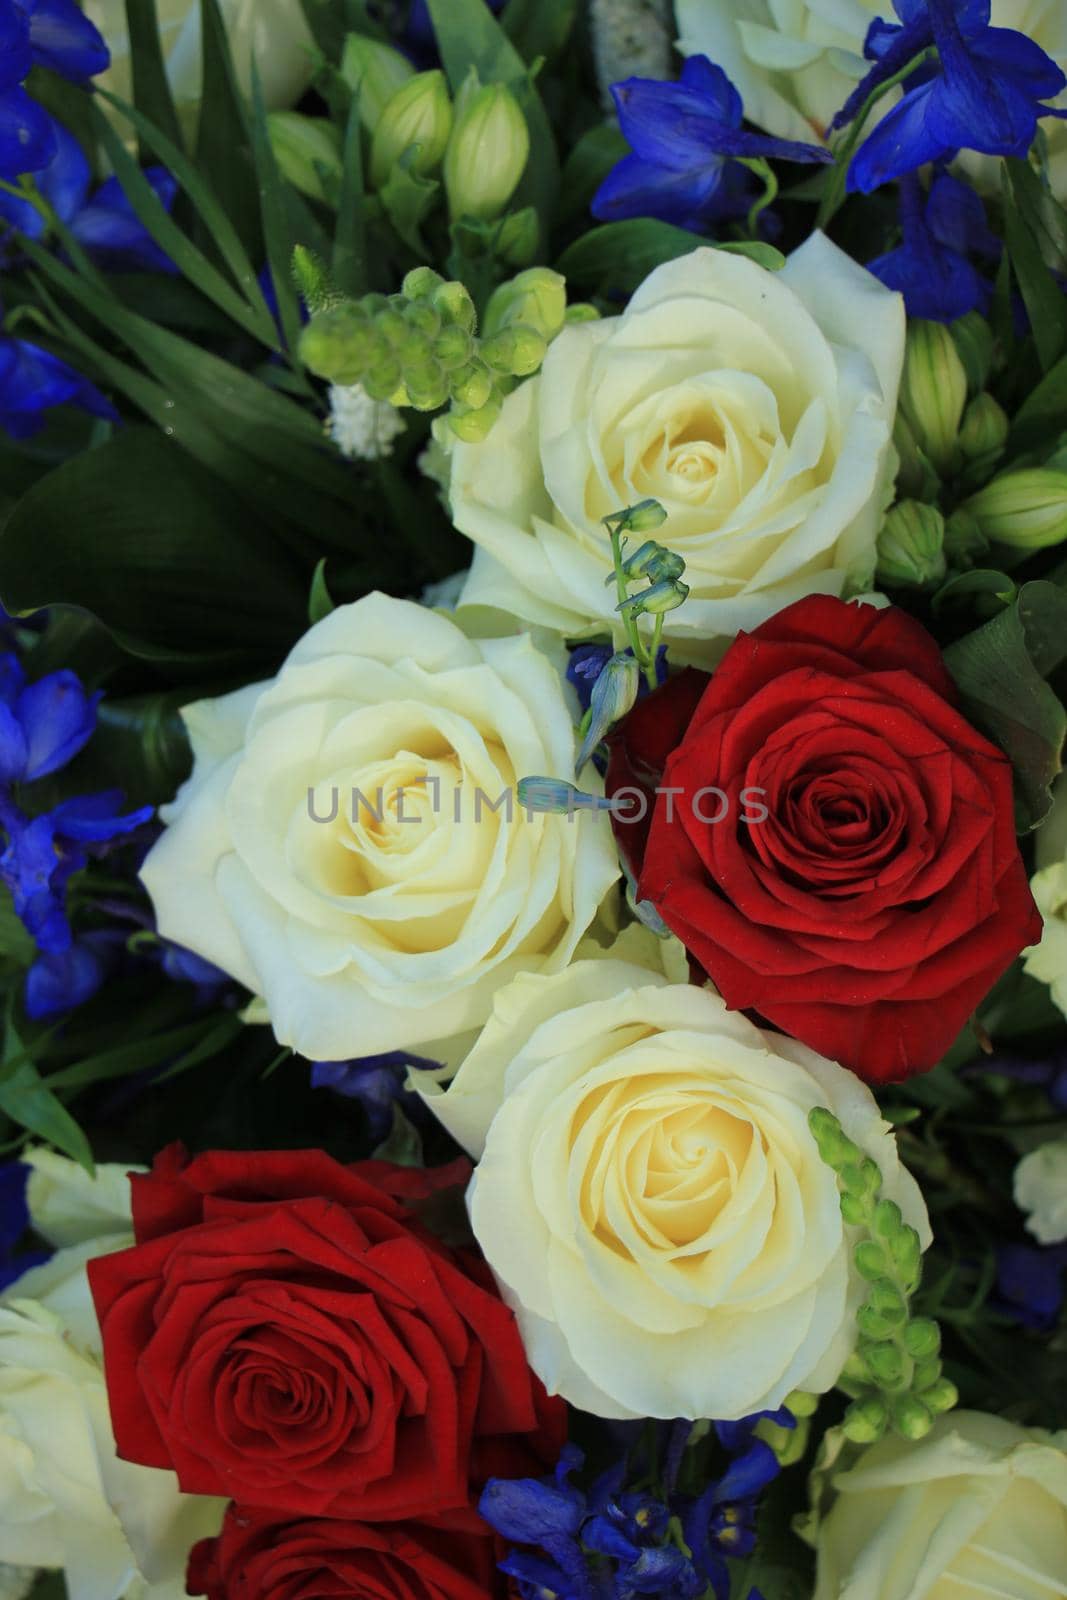 Wedding flowers in red, white and blue, patriotic theme wedding